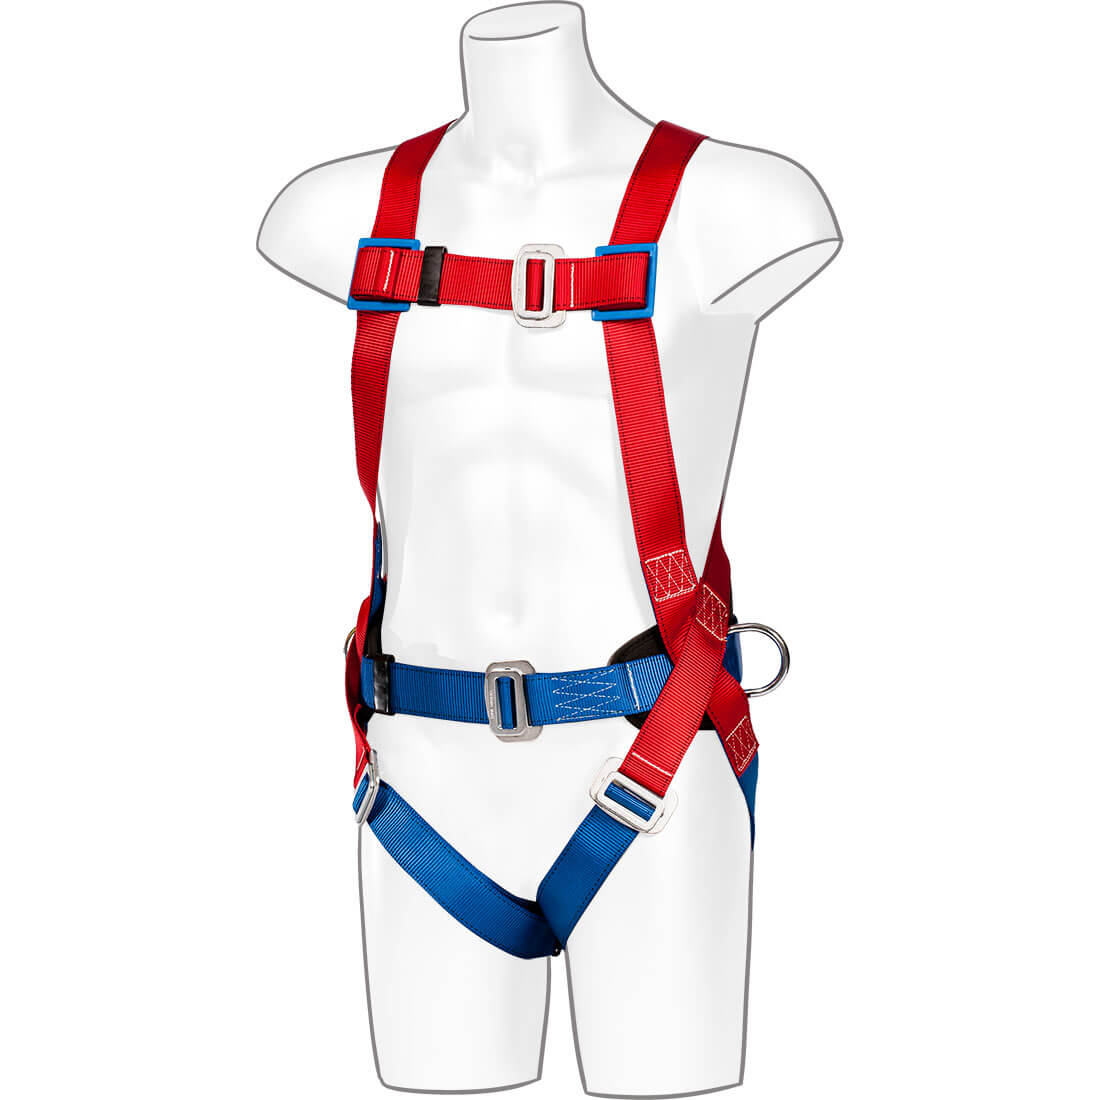 Portwest 2 Point Comfort Harness - Red